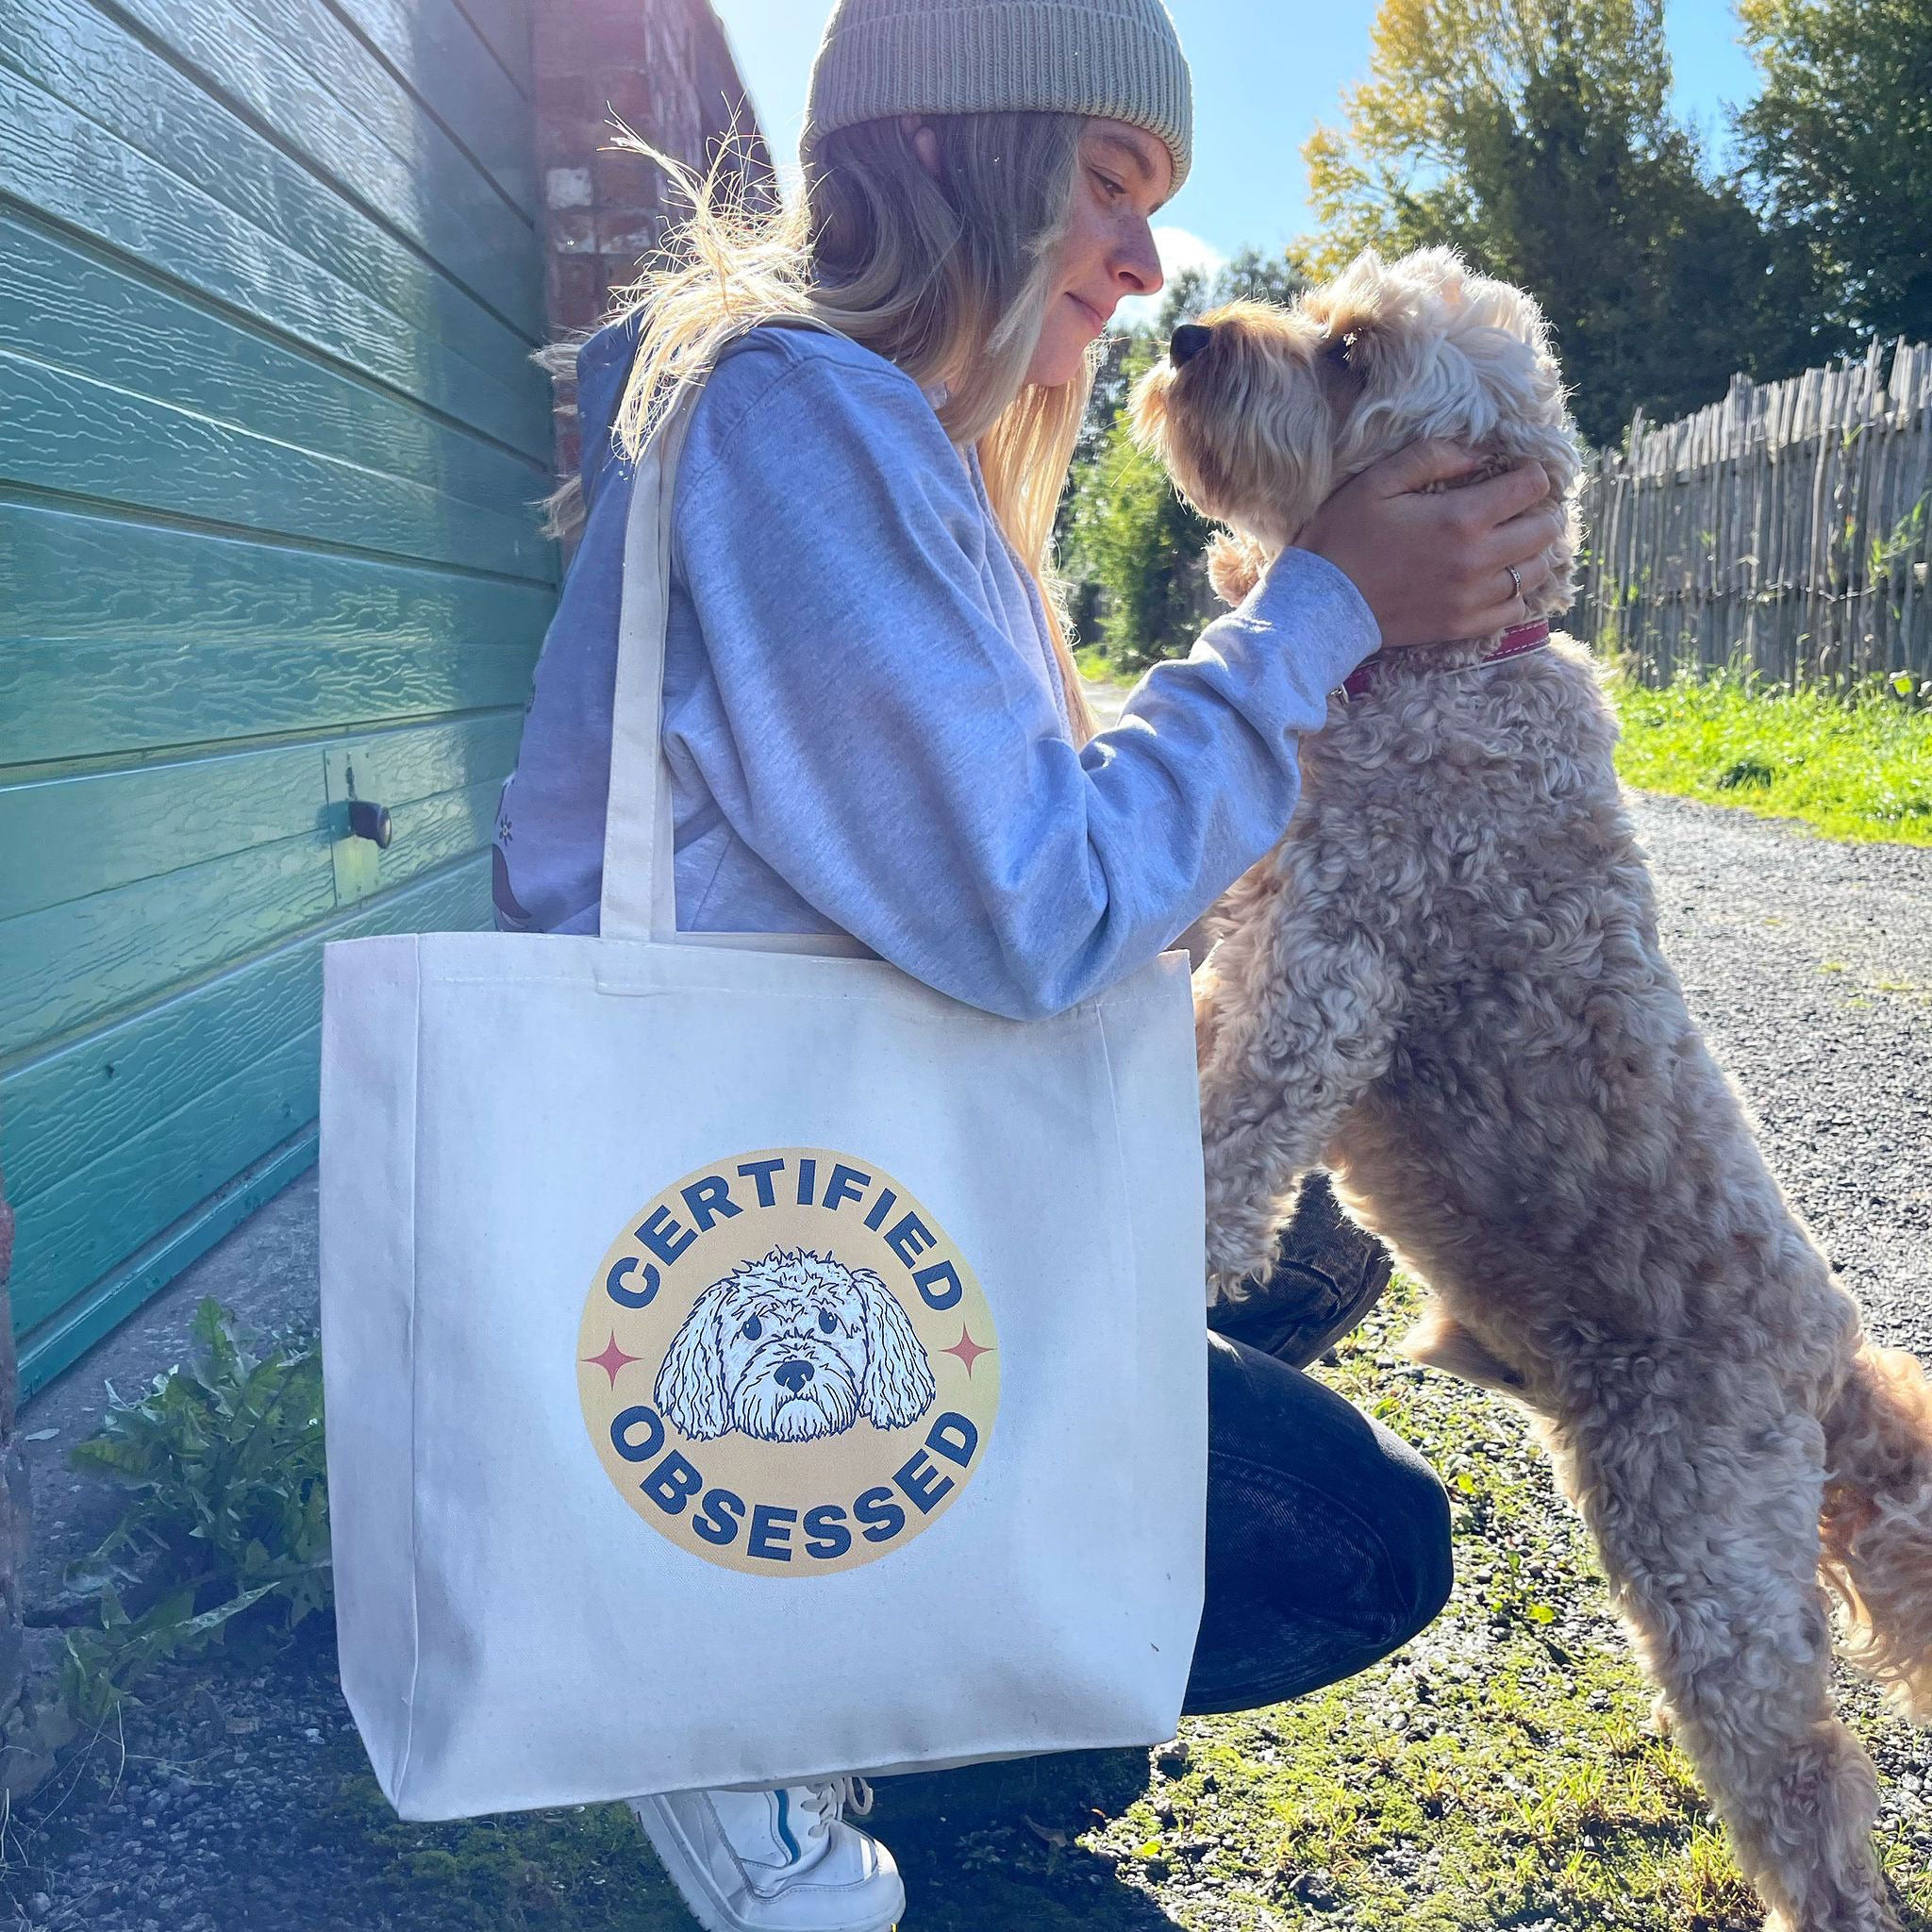 The Certified Obsessed Dog Lover Tote Bag